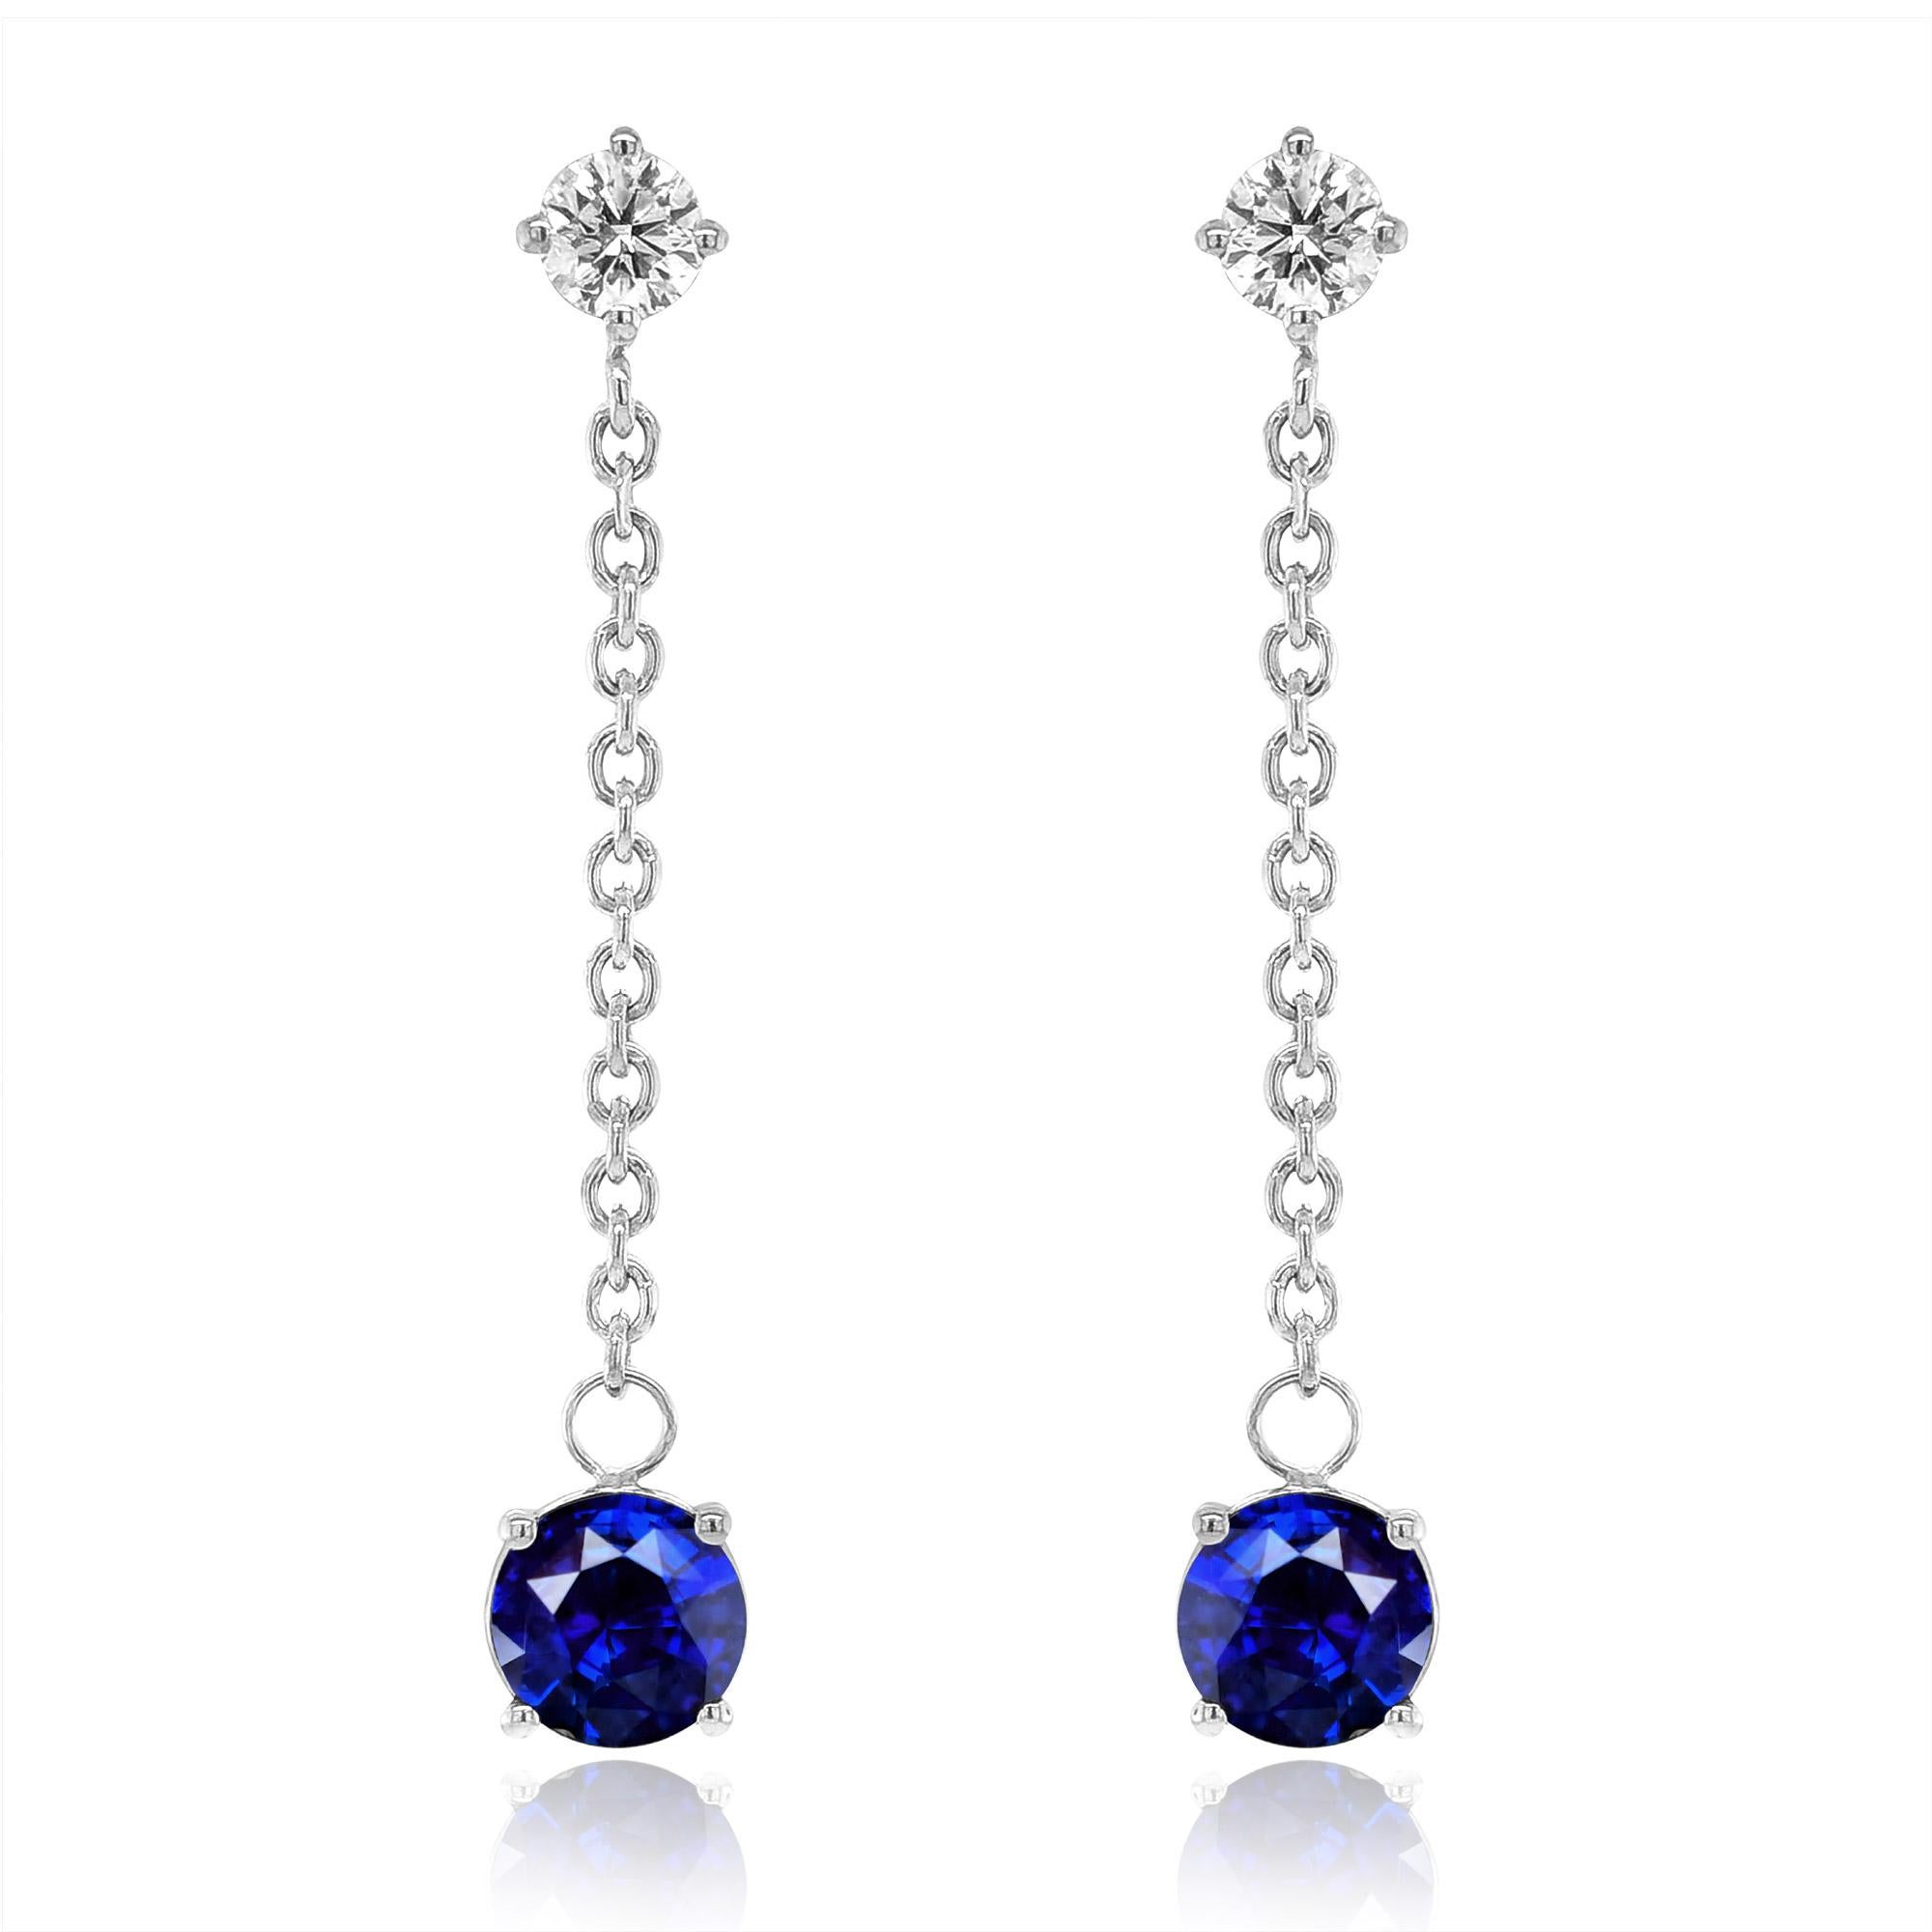 Women's Natural Blue Sapphires 2.02 Carats Earrings with Diamonds For Sale